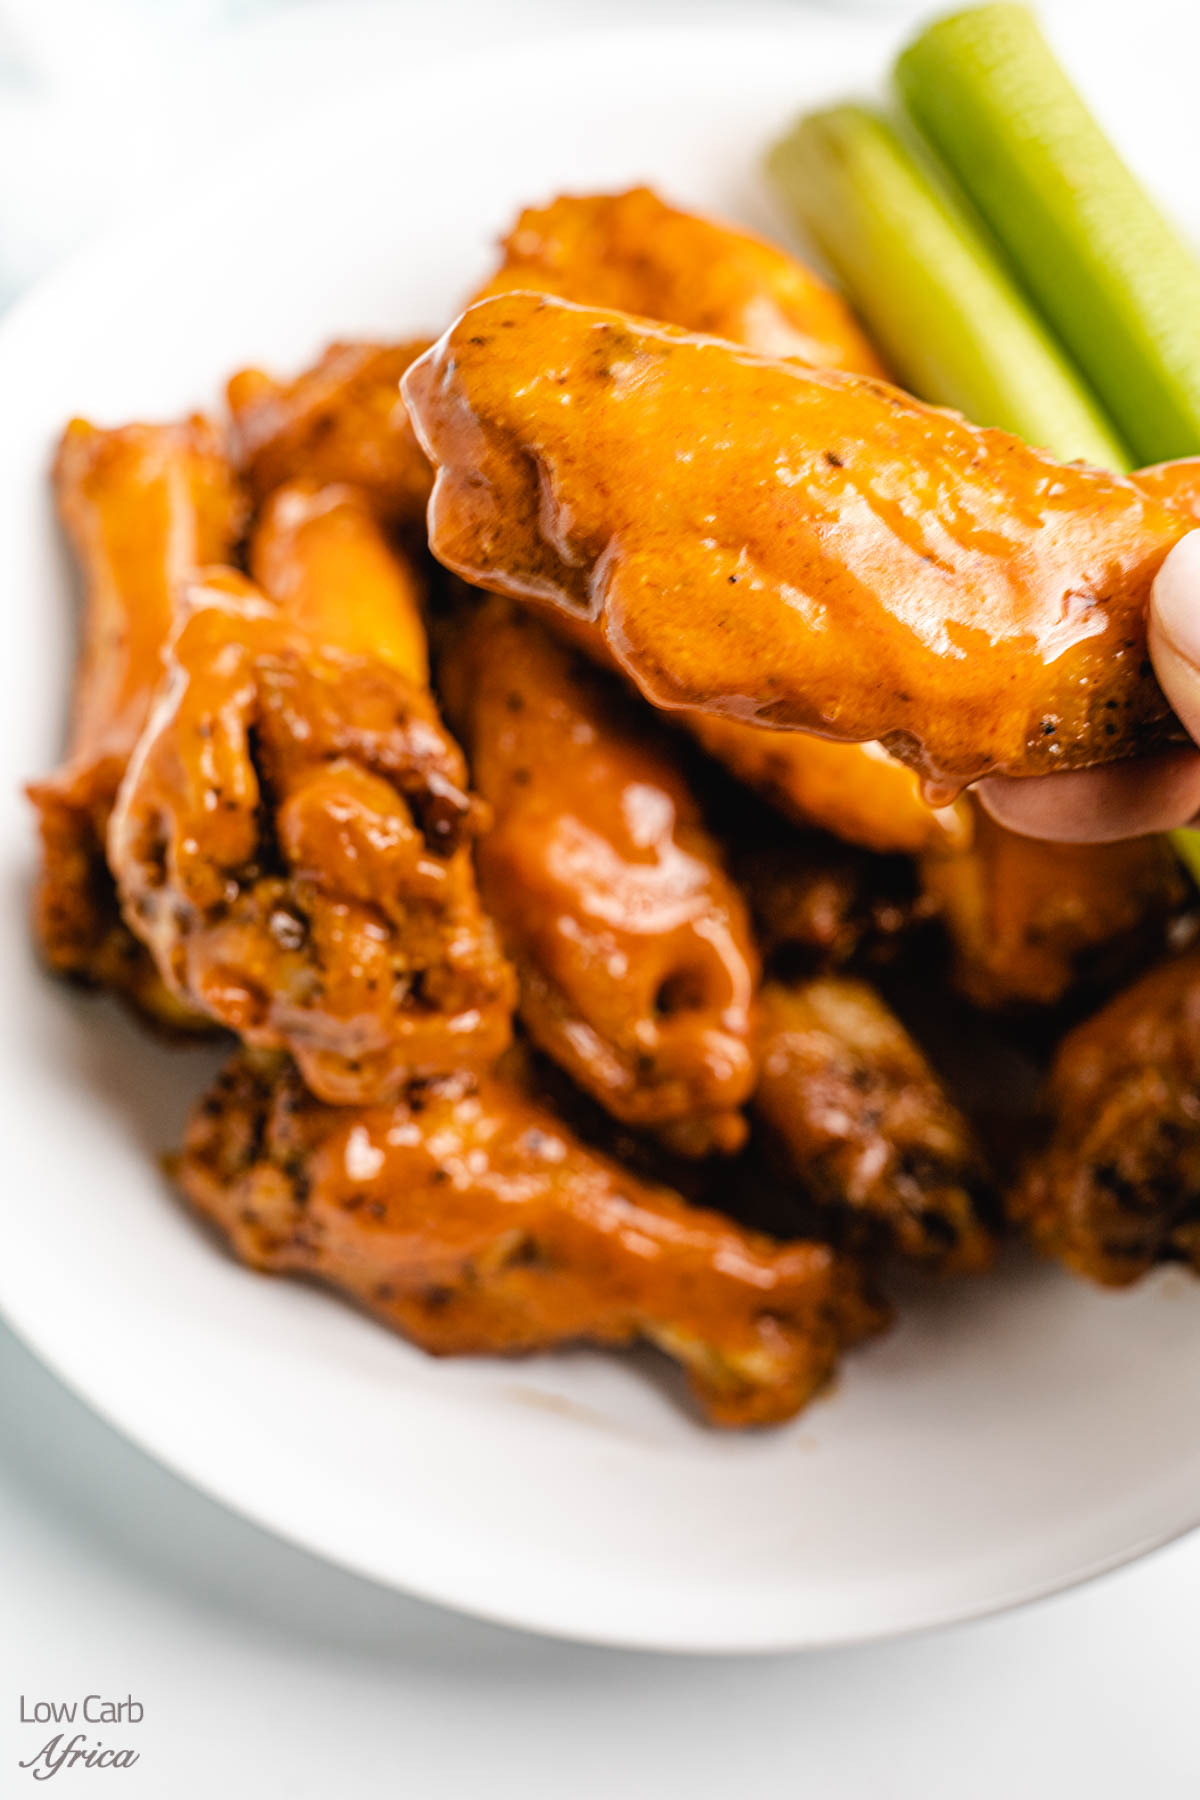 buffalo wings with celery on the side